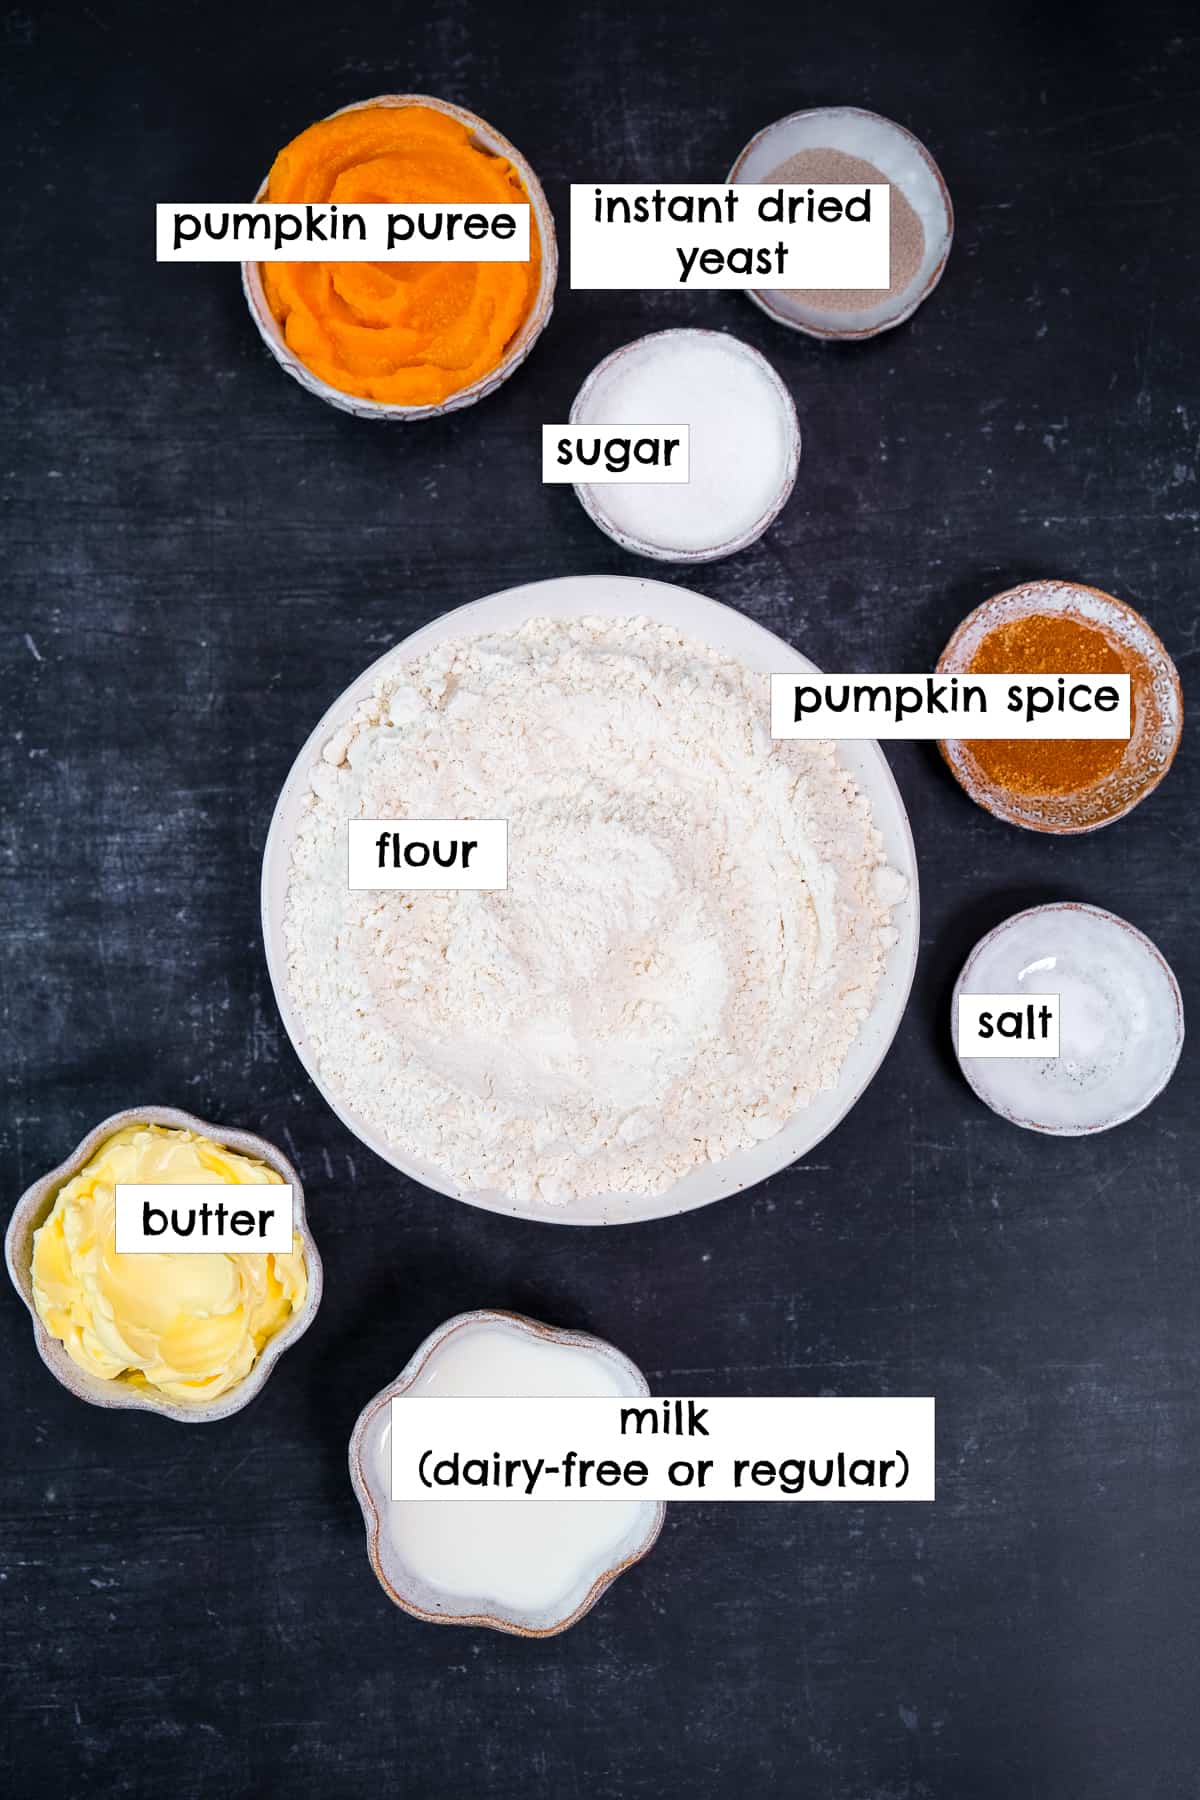 Flour, pumpkin spice, butter, milk, pumpkin puree, sugar and yeast all in separate bowls photographed on a dark background.